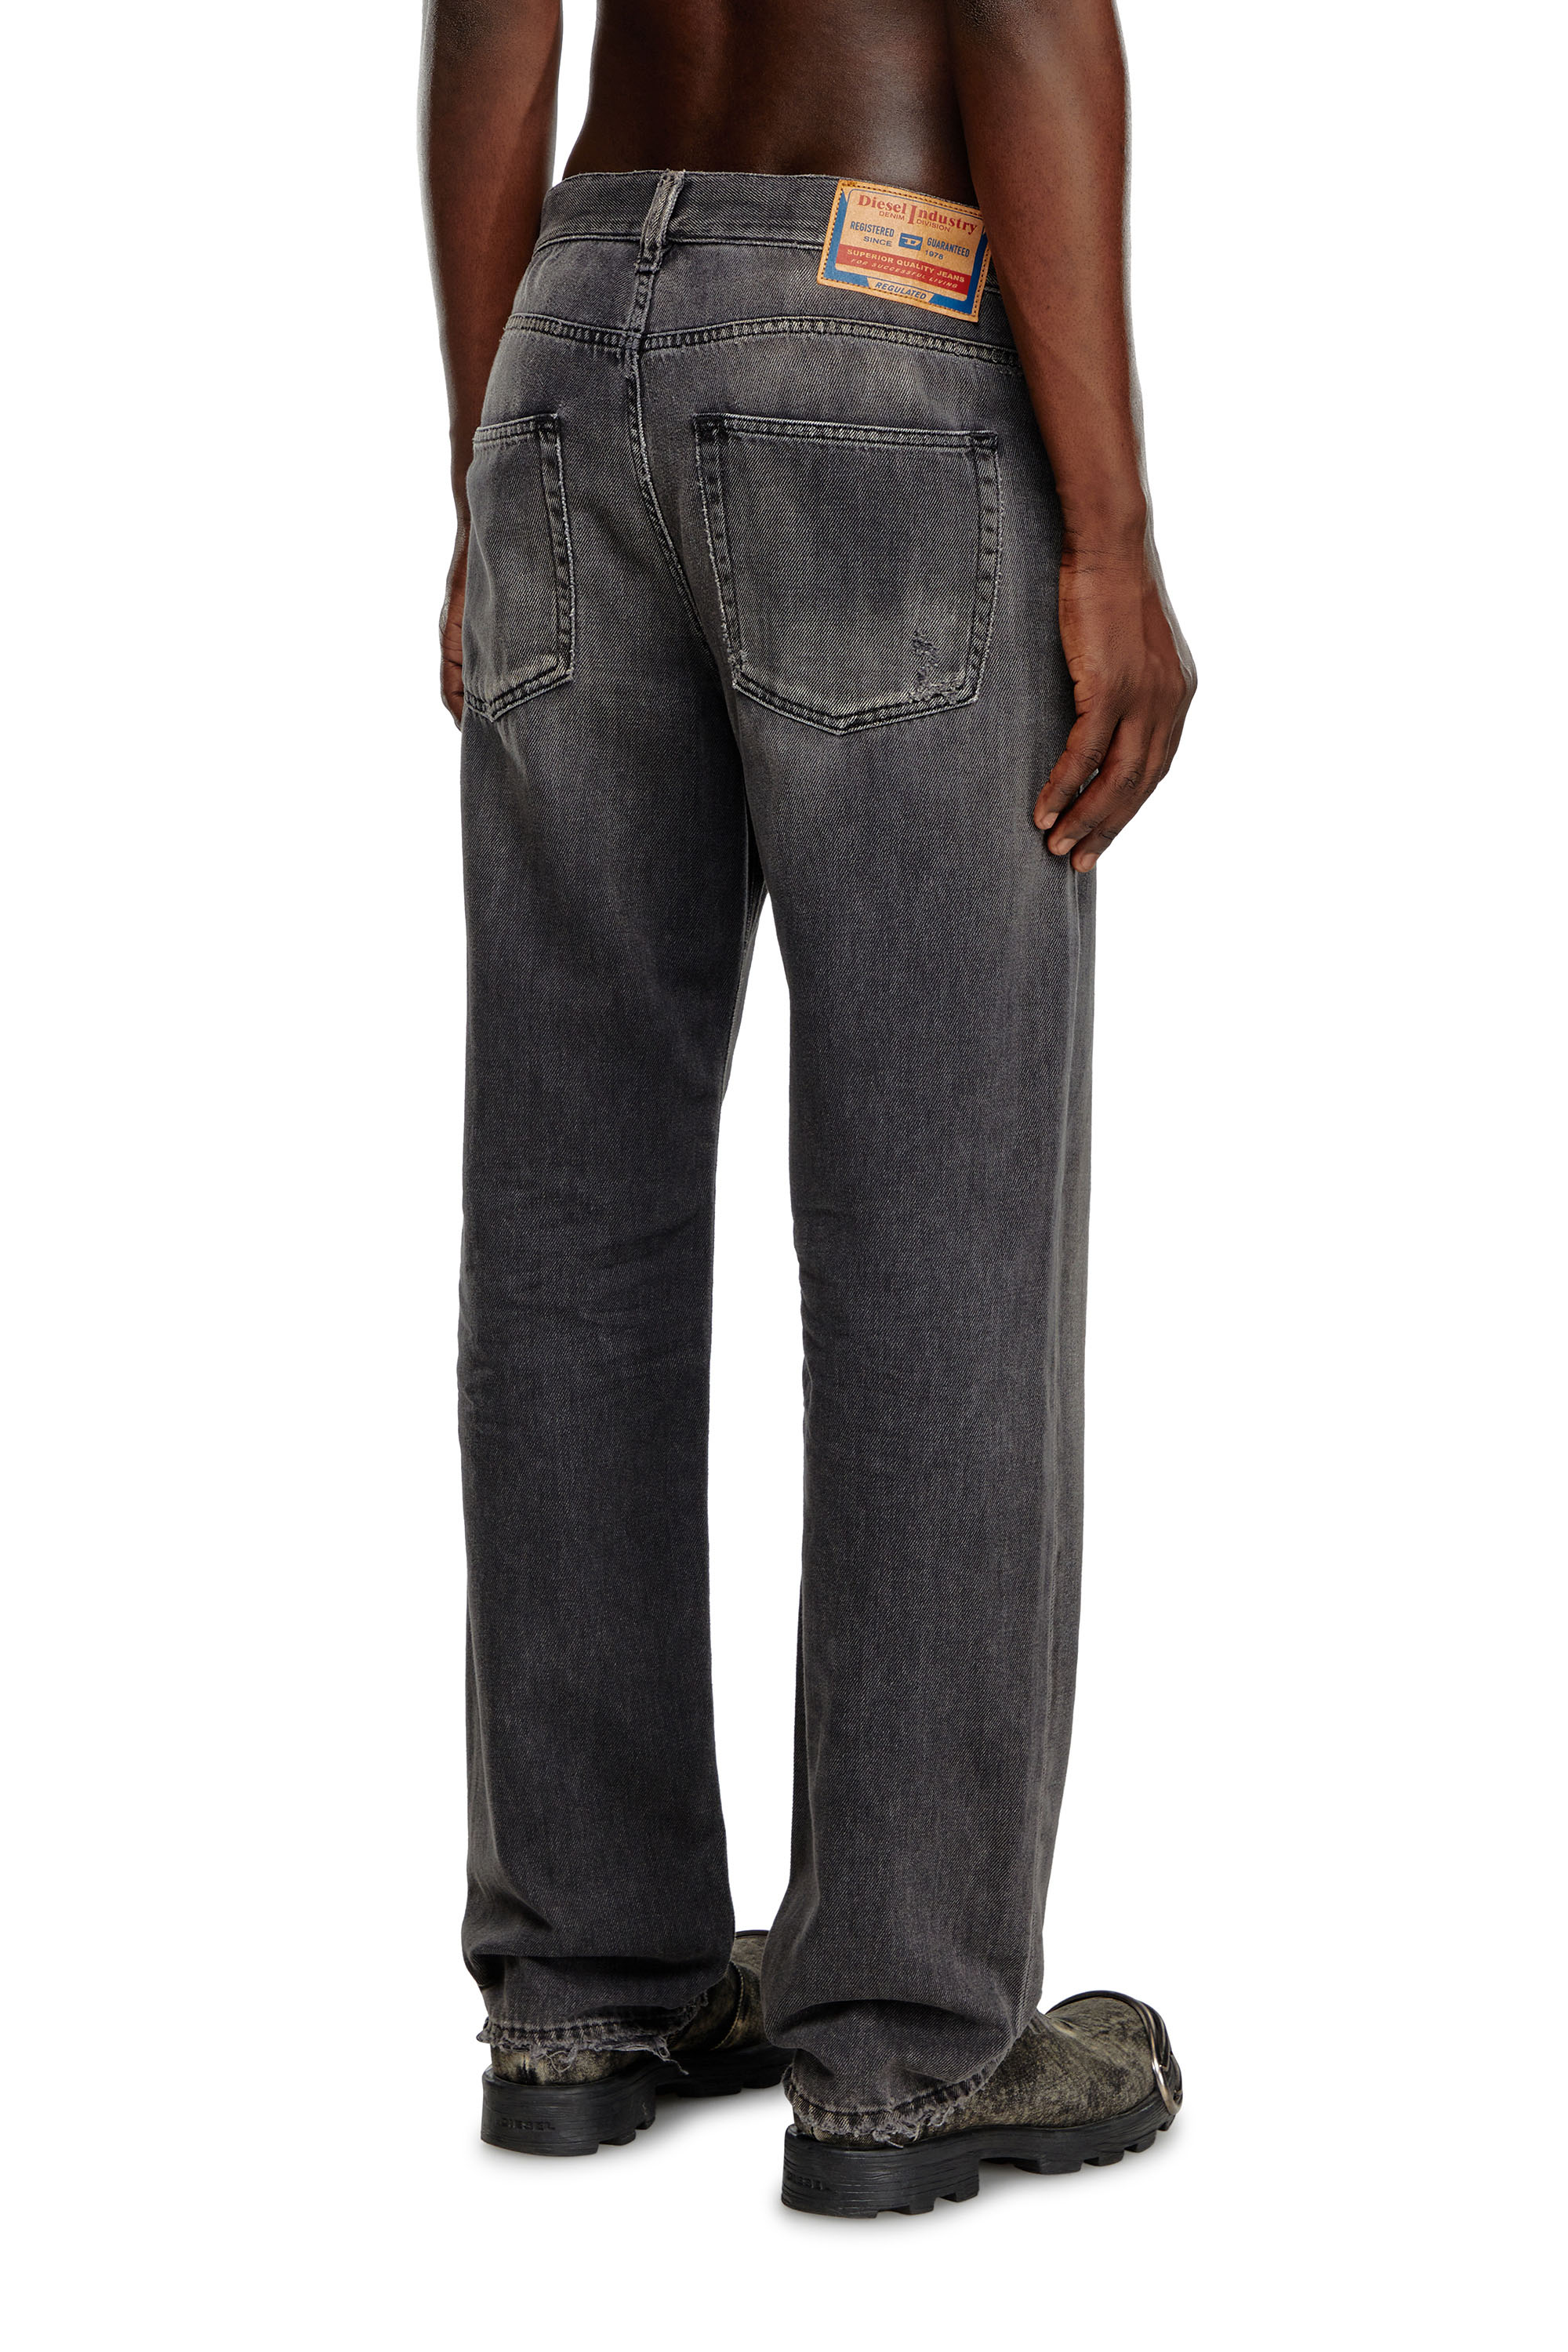 Diesel - Straight Jeans 2010 D-Macs 09K14, Hombre Straight Jeans - 2010 D-Macs in Negro - Image 3